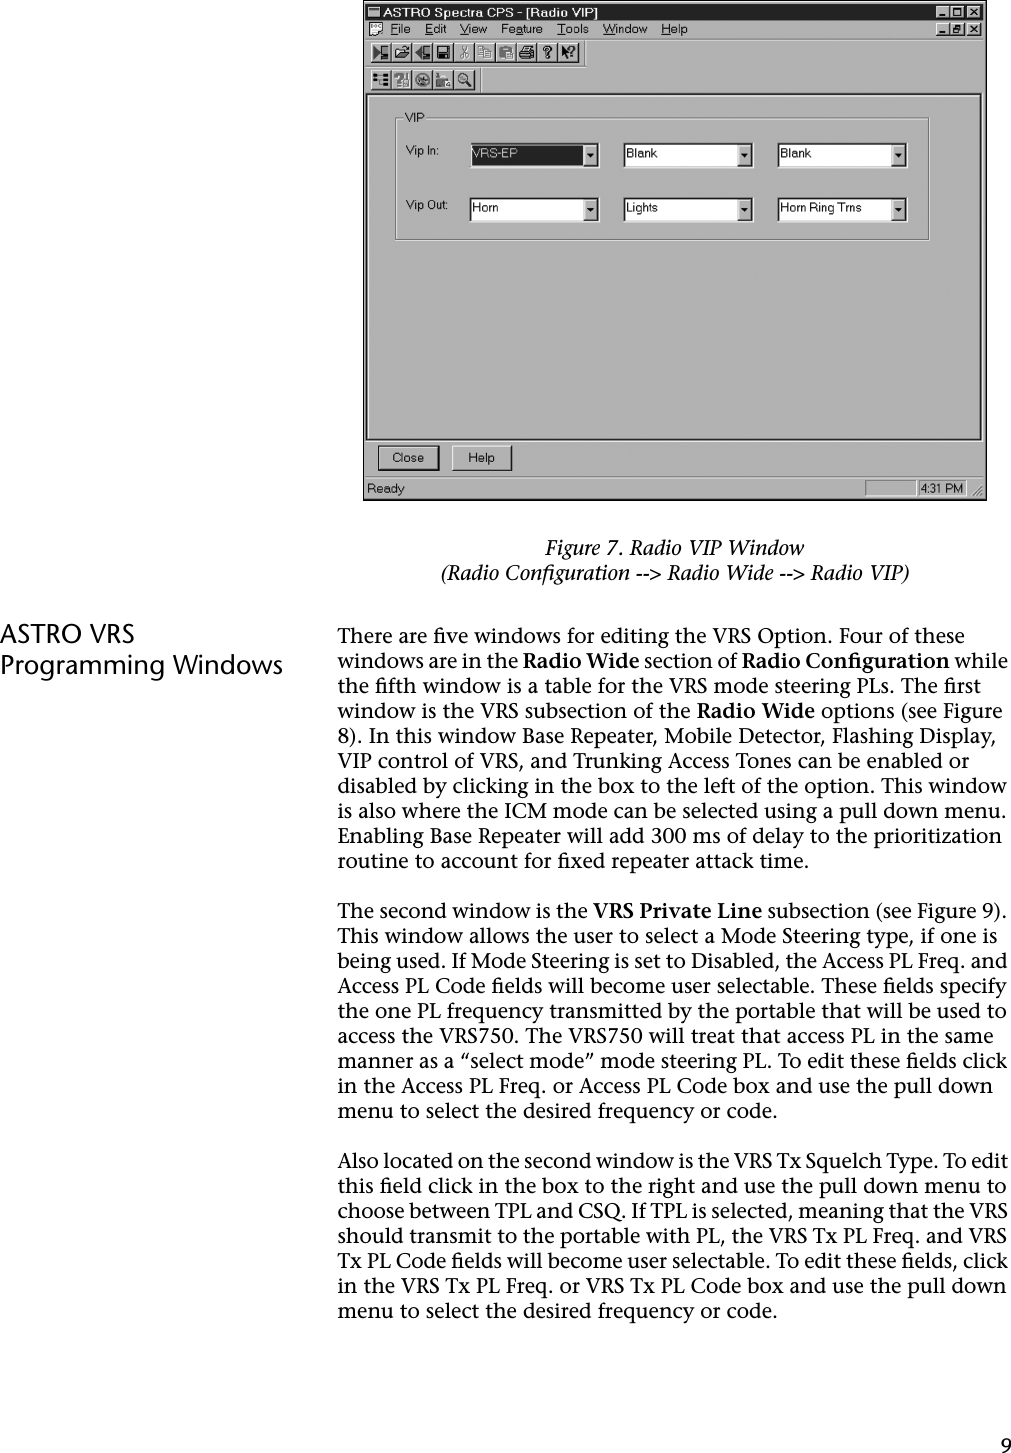 9ASTRO VRS Programming WindowsThere are ﬁve windows for editing the VRS Option. Four of these windows are in the Radio Wide section of Radio Conﬁguration while the ﬁfth window is a table for the VRS mode steering PLs. The ﬁrst window is the VRS subsection of the Radio Wide options (see Figure 8). In this window Base Repeater, Mobile Detector, Flashing Display, VIP control of VRS, and Trunking Access Tones can be enabled or disabled by clicking in the box to the left of the option. This window is also where the ICM mode can be selected using a pull down menu. Enabling Base Repeater will add 300 ms of delay to the prioritization routine to account for ﬁxed repeater attack time.The second window is the VRS Private Line subsection (see Figure 9). This window allows the user to select a Mode Steering type, if one is being used. If Mode Steering is set to Disabled, the Access PL Freq. and Access PL Code ﬁelds will become user selectable. These ﬁelds specify the one PL frequency transmitted by the portable that will be used to access the VRS750. The VRS750 will treat that access PL in the same manner as a “select mode” mode steering PL. To edit these ﬁelds click in the Access PL Freq. or Access PL Code box and use the pull down menu to select the desired frequency or code.Also located on the second window is the VRS Tx Squelch Type. To edit this ﬁeld click in the box to the right and use the pull down menu to choose between TPL and CSQ. If TPL is selected, meaning that the VRS should transmit to the portable with PL, the VRS Tx PL Freq. and VRS Tx PL Code ﬁelds will become user selectable. To edit these ﬁelds, click in the VRS Tx PL Freq. or VRS Tx PL Code box and use the pull down menu to select the desired frequency or code.Figure 7. Radio VIP Window(Radio Conﬁguration --&gt; Radio Wide --&gt; Radio VIP)